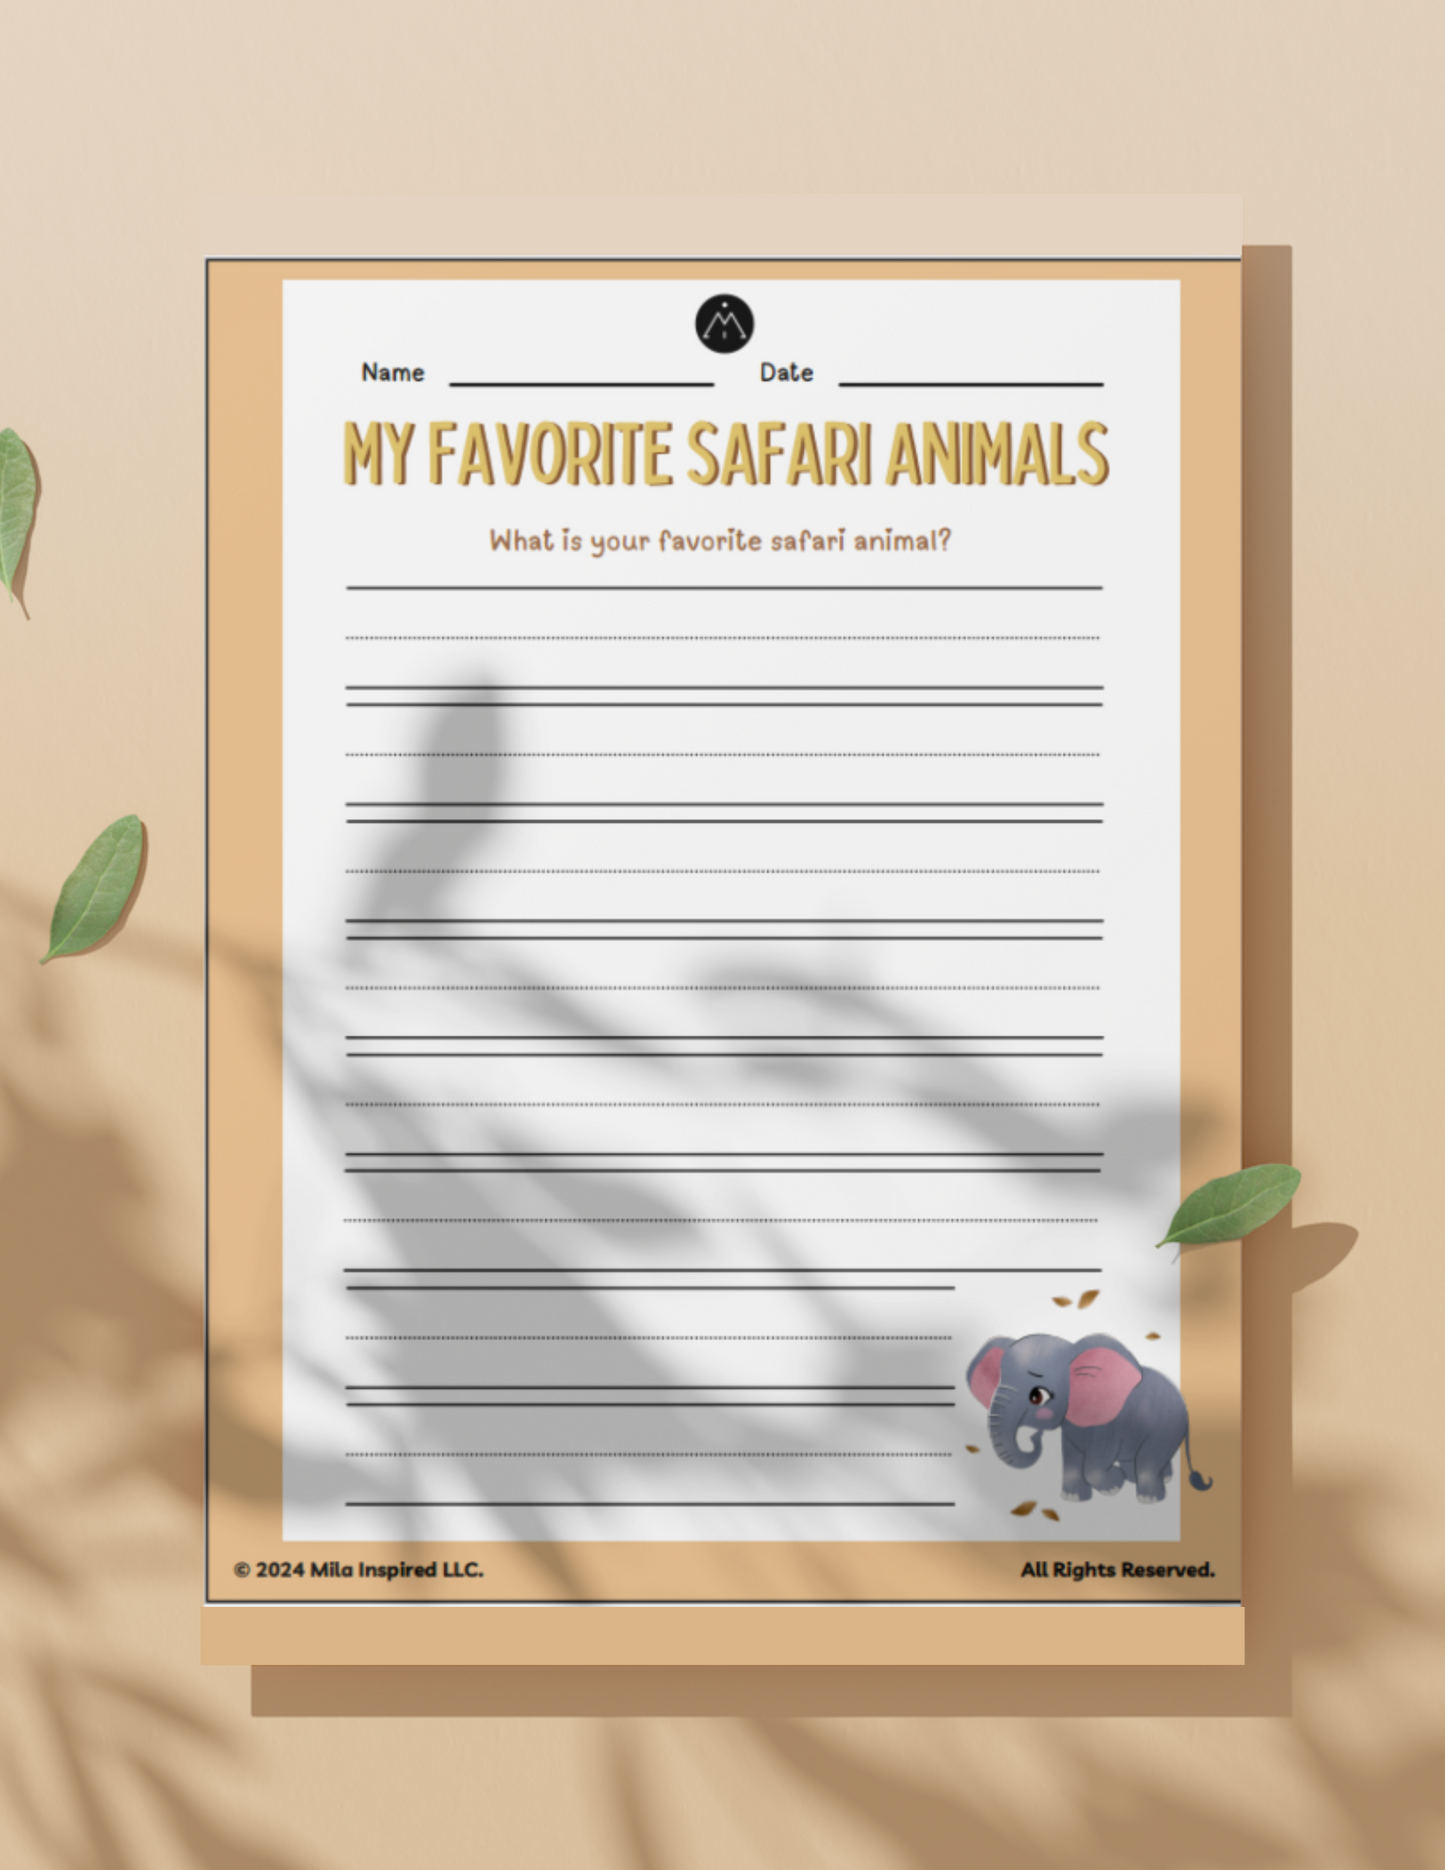 Safari Animals Activity Worksheet (INSTANT DOWNLOAD): Activity Worksheet for Young Children | 3 Pages with Fun Activities and Images from 'The Little Elephant's Big Adventure'